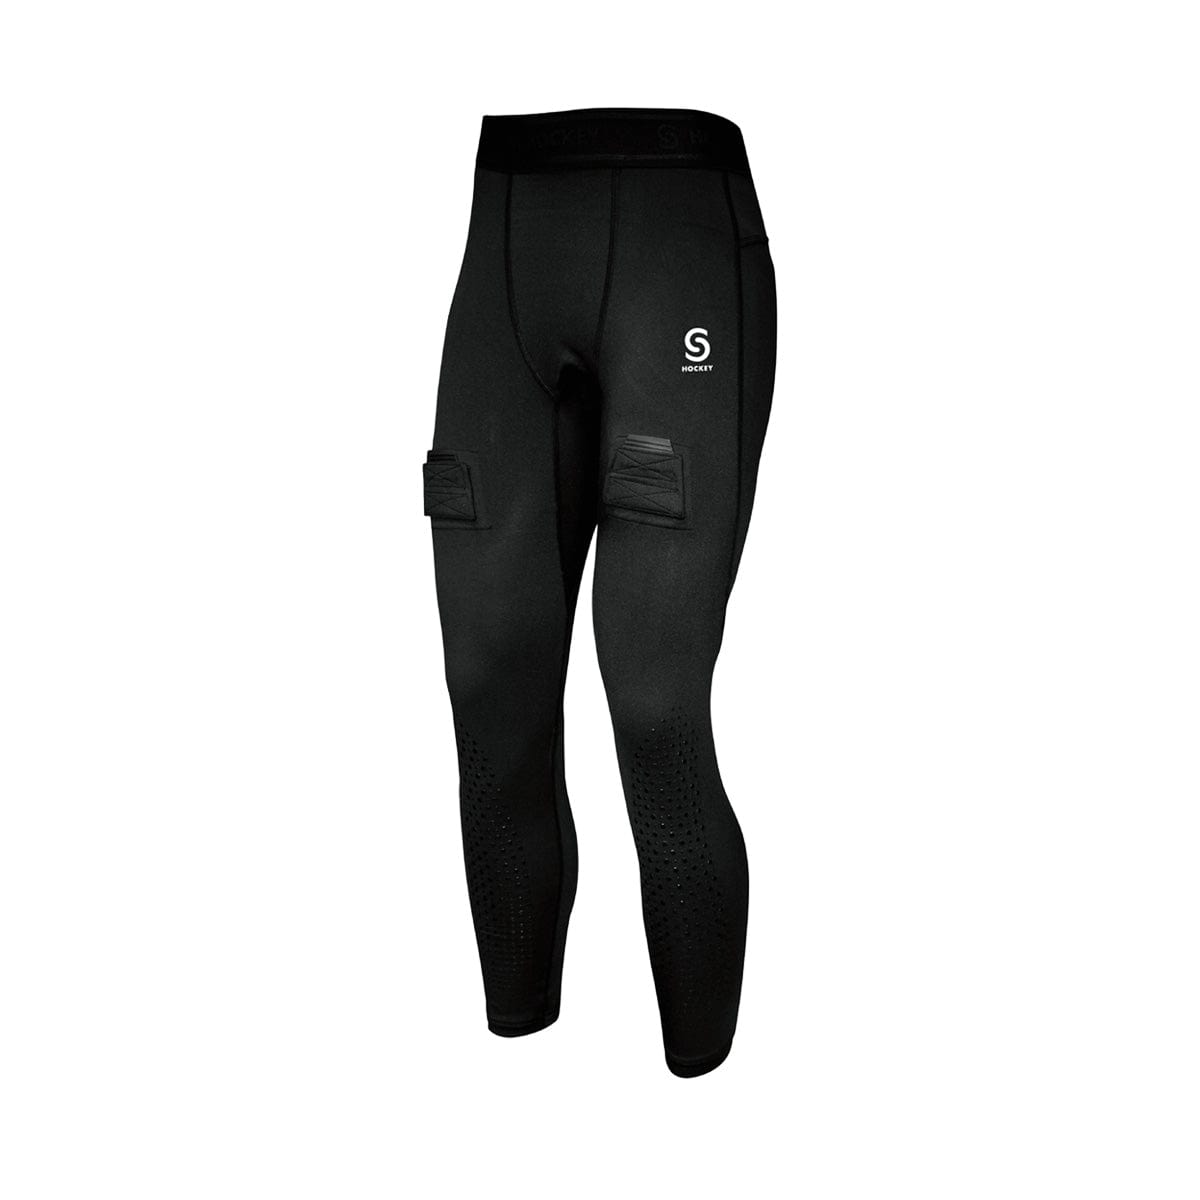 Source for Sports Senior Compression Jill Pants - The Hockey Shop Source For Sports